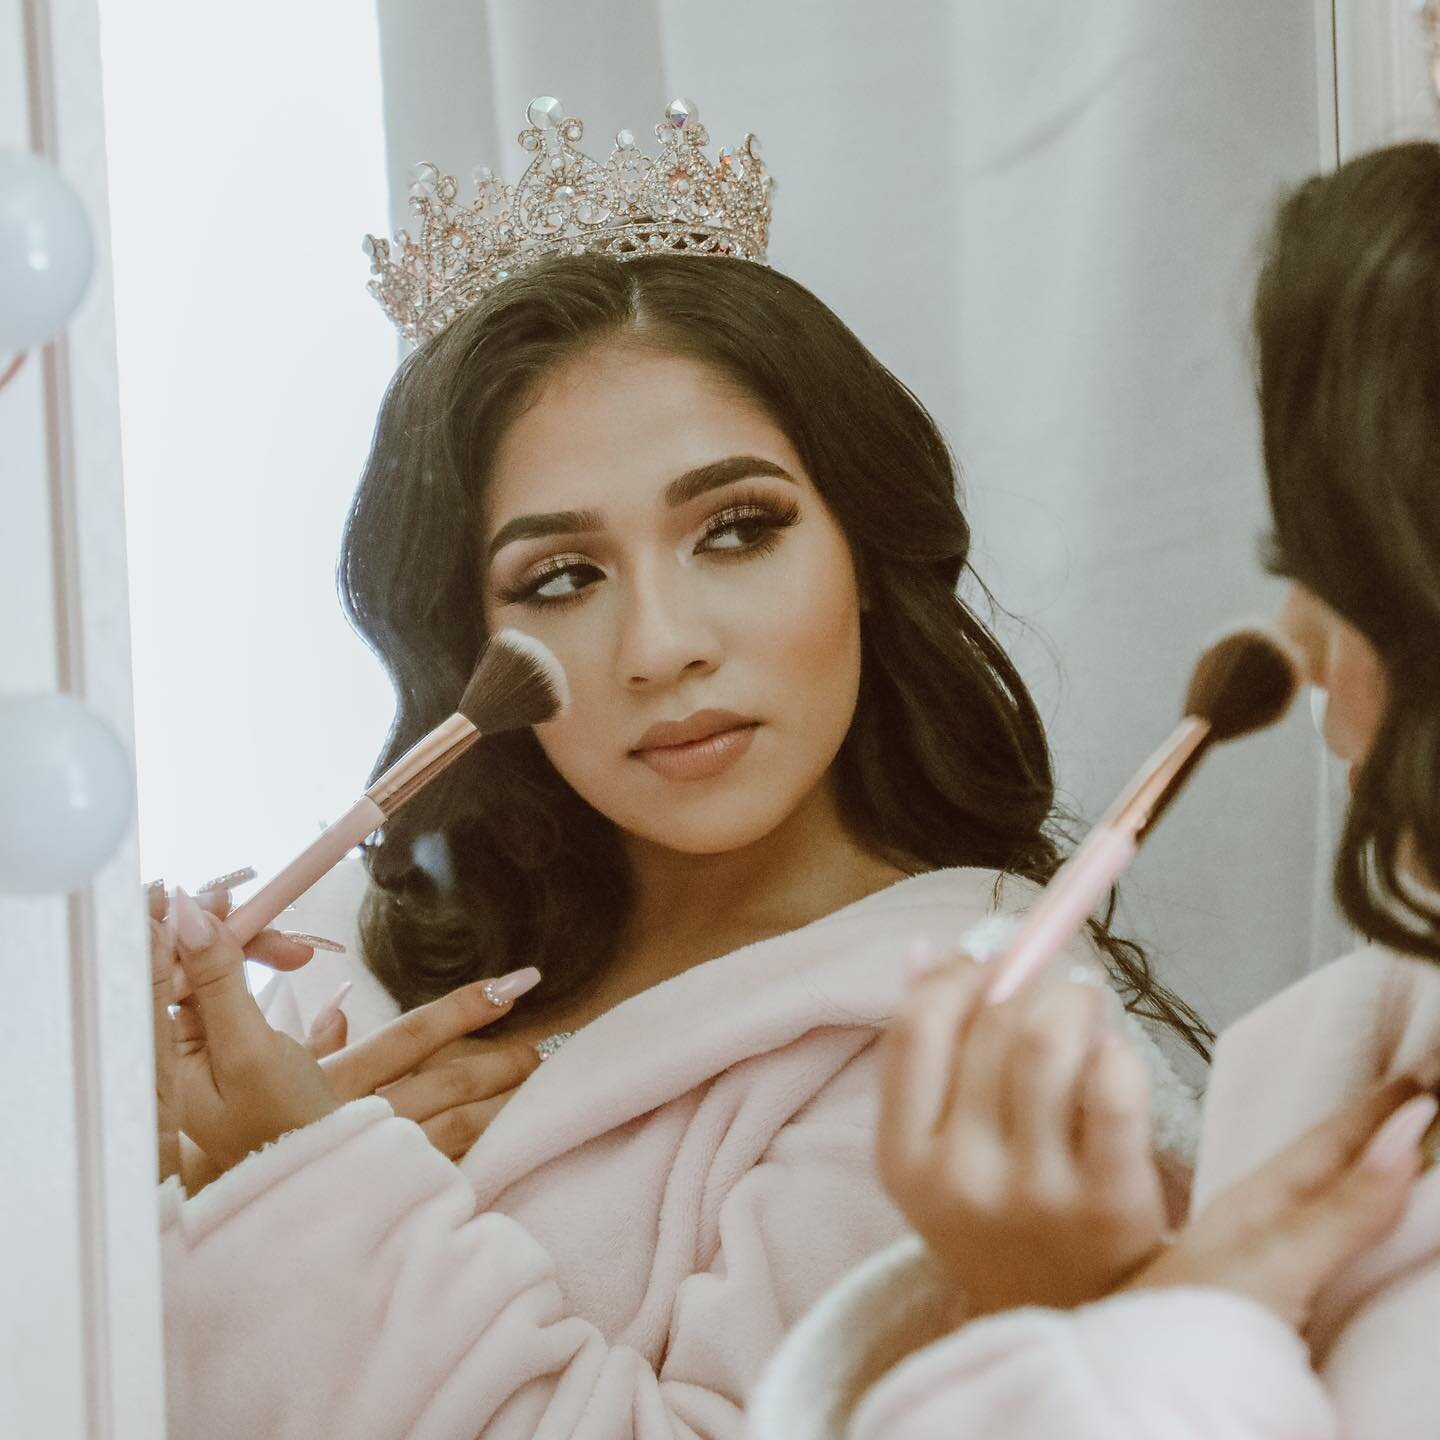 Quince queen 👑 getting dolled up for her big day. So beautiful ✨💗 

#quincea&ntilde;era #misquincea&ntilde;os #sacramento #bayarea #photography #quincedetails #sacevents #beauty #inspofashion #photography #quinceanerahairstyle #sanfrancisocityhall 